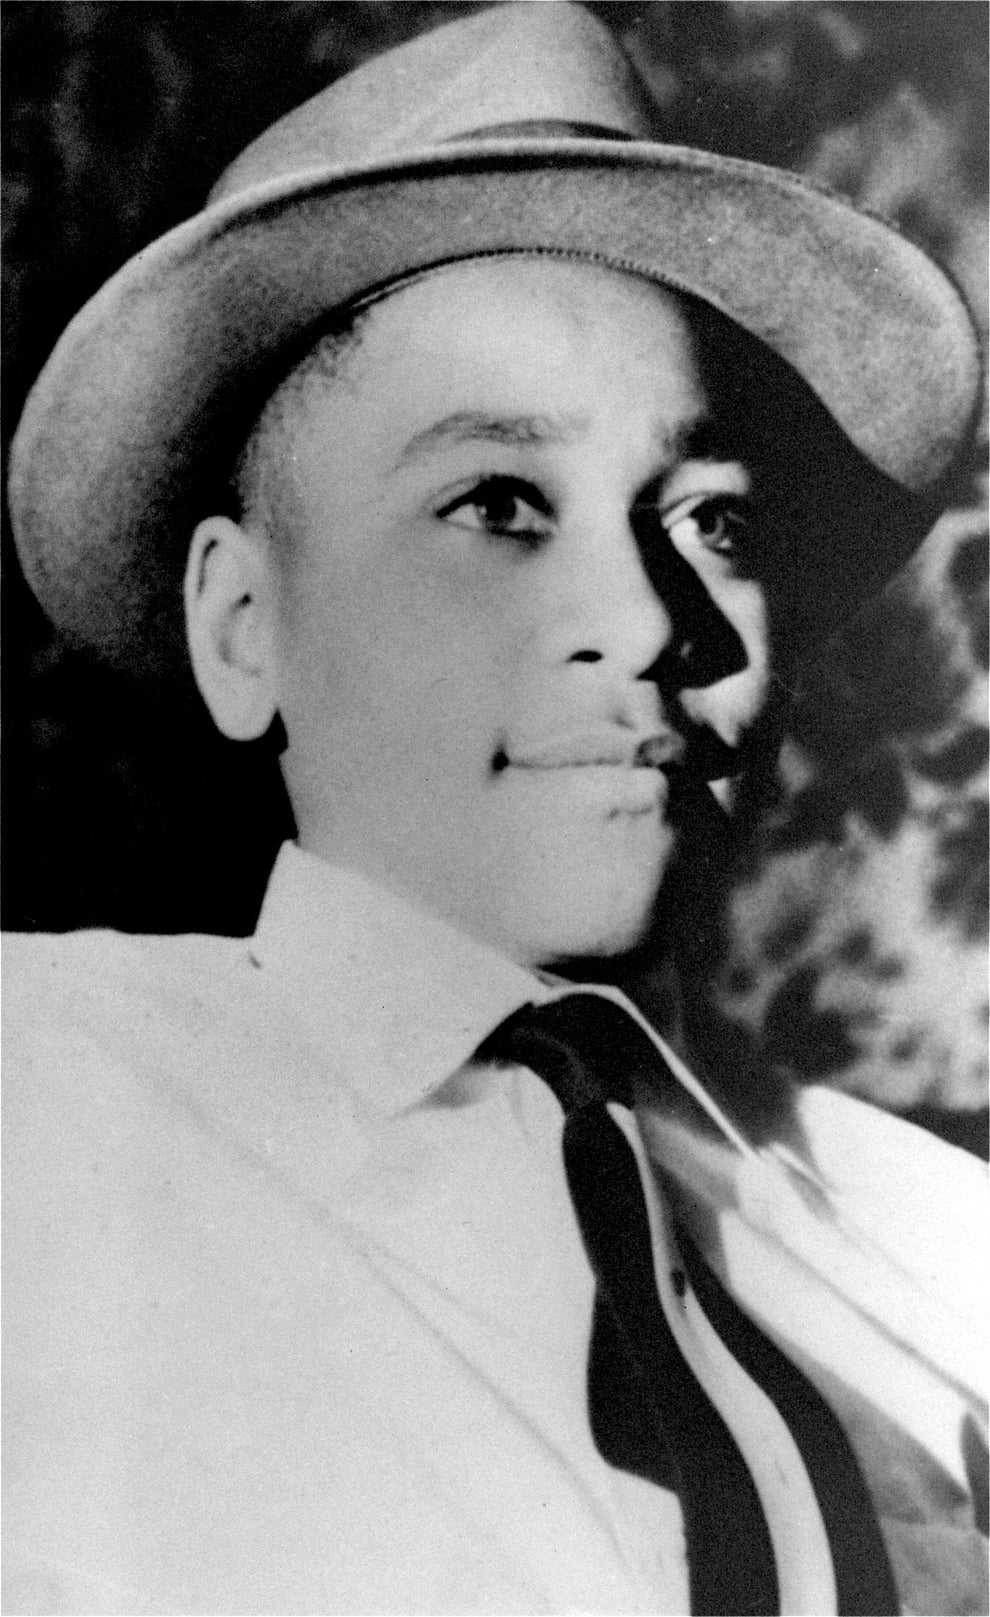 An Emmett Till Sign In Mississippi Has Been Vandalized With Bullet Holes